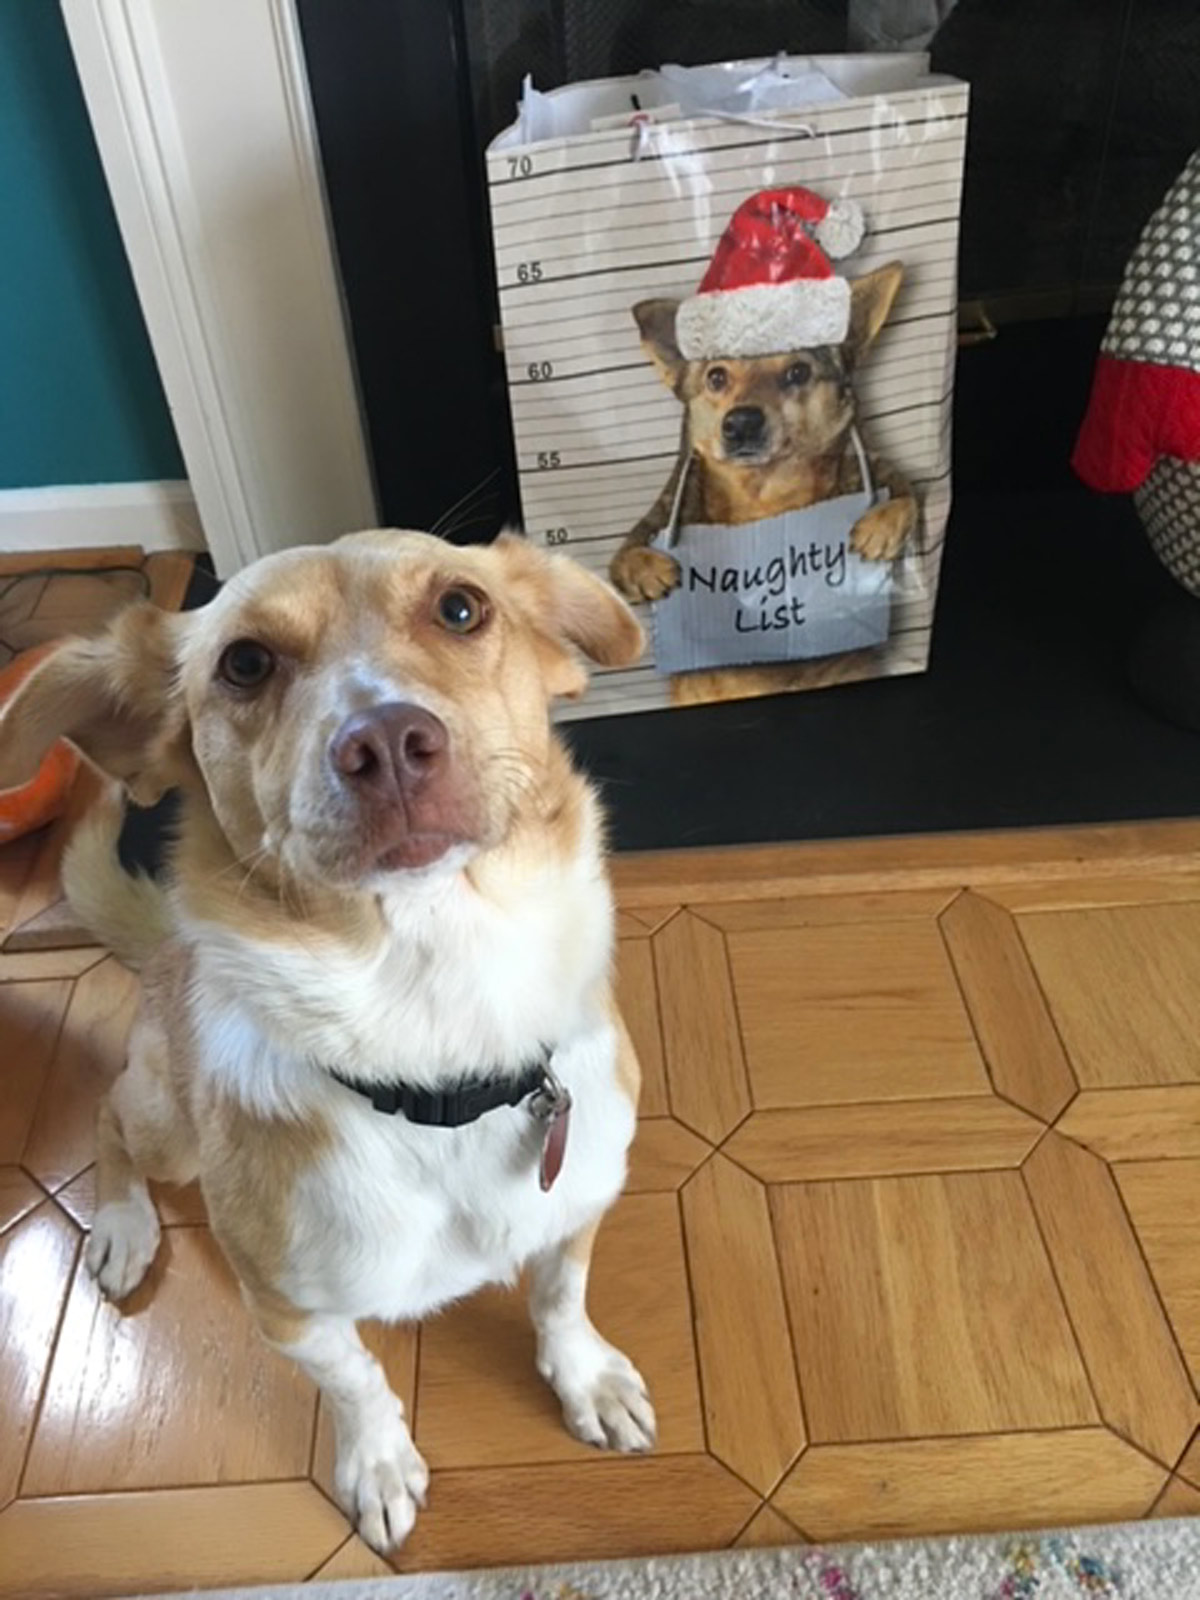 Meet Angie C.’s Run Away Ruby. Two days after she adopted Ruby, in September of 2020, Ruby escaped from the yard and traveled two miles before being picked up by the police. For this, Ruby landed on Santa’s Naughty List!